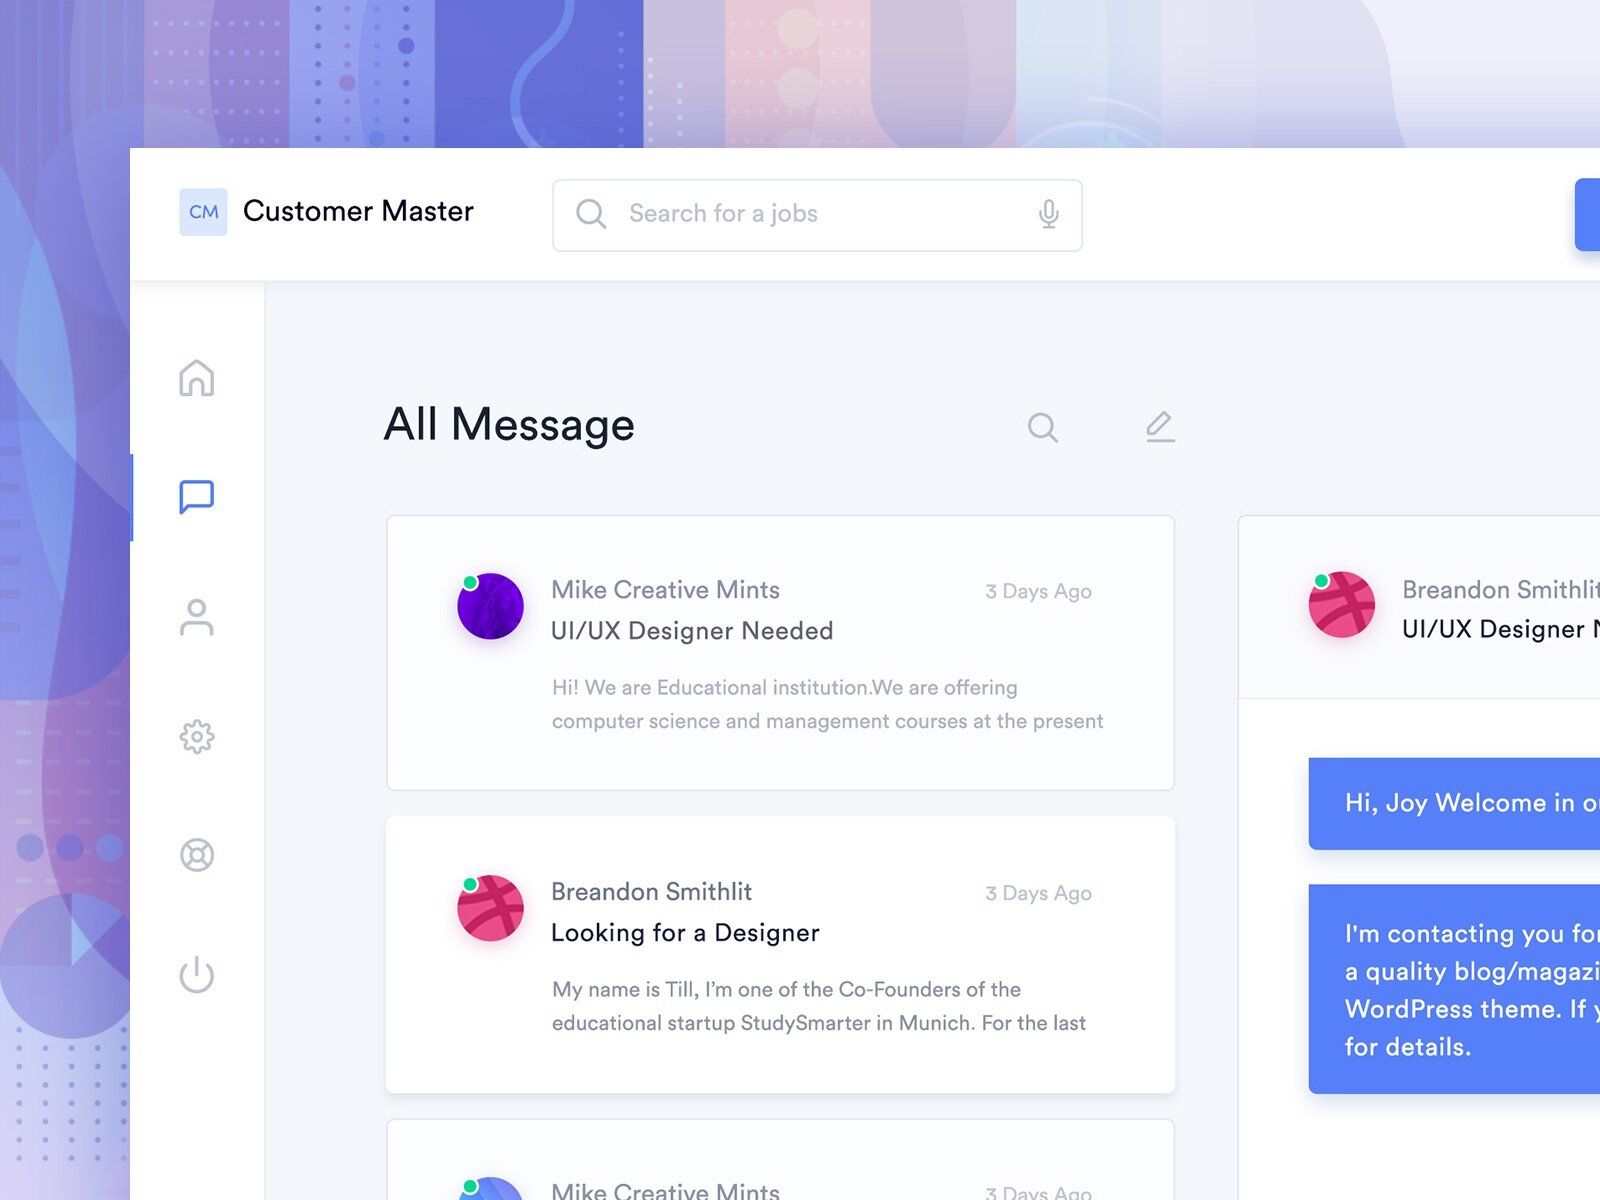 The chat example to build an online marketplace for services (*image by [Masudur Rahman](https://cdn.dribbble.com/users/443226/screenshots/5765783/customer_message_screen_wip.jpg){ rel="nofollow" target="_blank" .default-md}*)